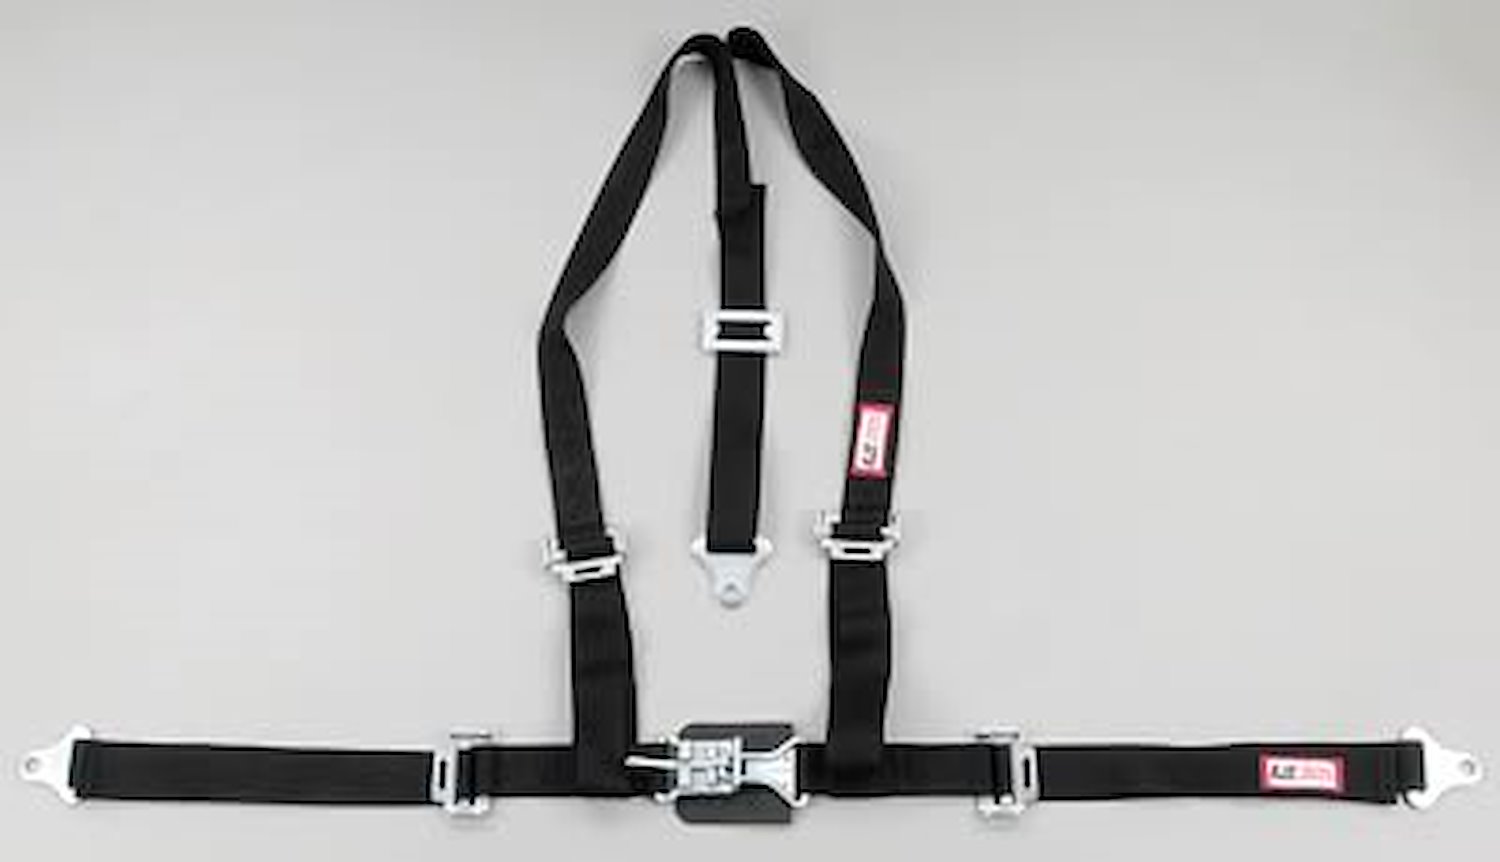 NON-SFI L&L HARNESS 2 PULL DOWN Lap Belt w/adjuster 2 S.H. V ROLL BAR MOUNT w/STERNUM STRAP ALL WRAP ENDS RED